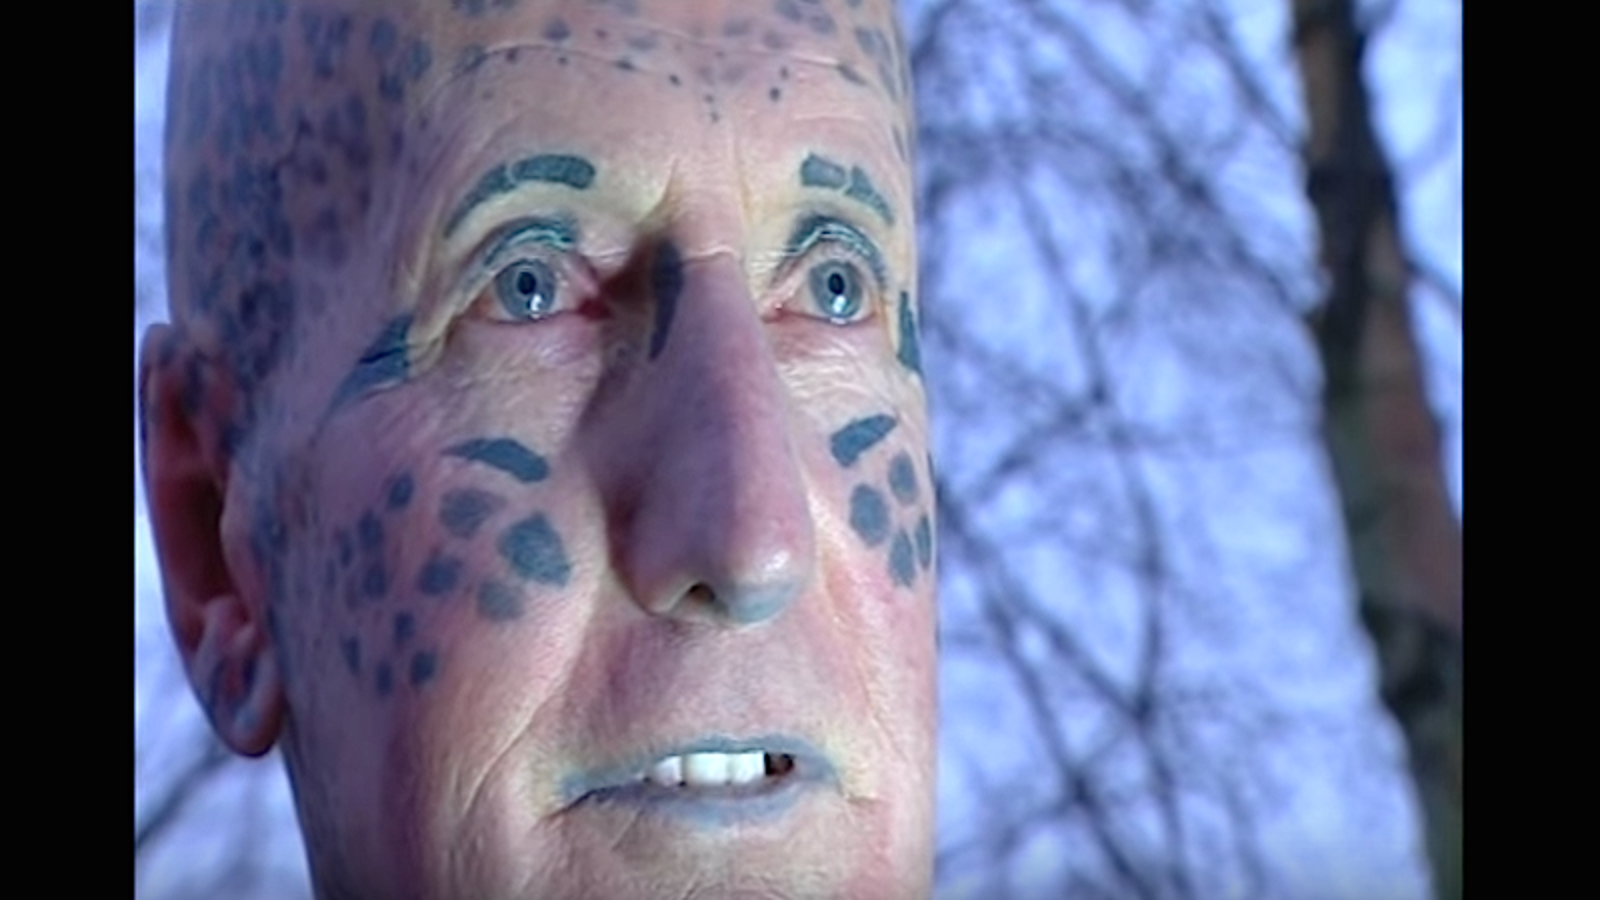 4. Tom Leppard, also known as "The Leopard Man", has 99.9% of his body covered in leopard print tattoos. - wide 3